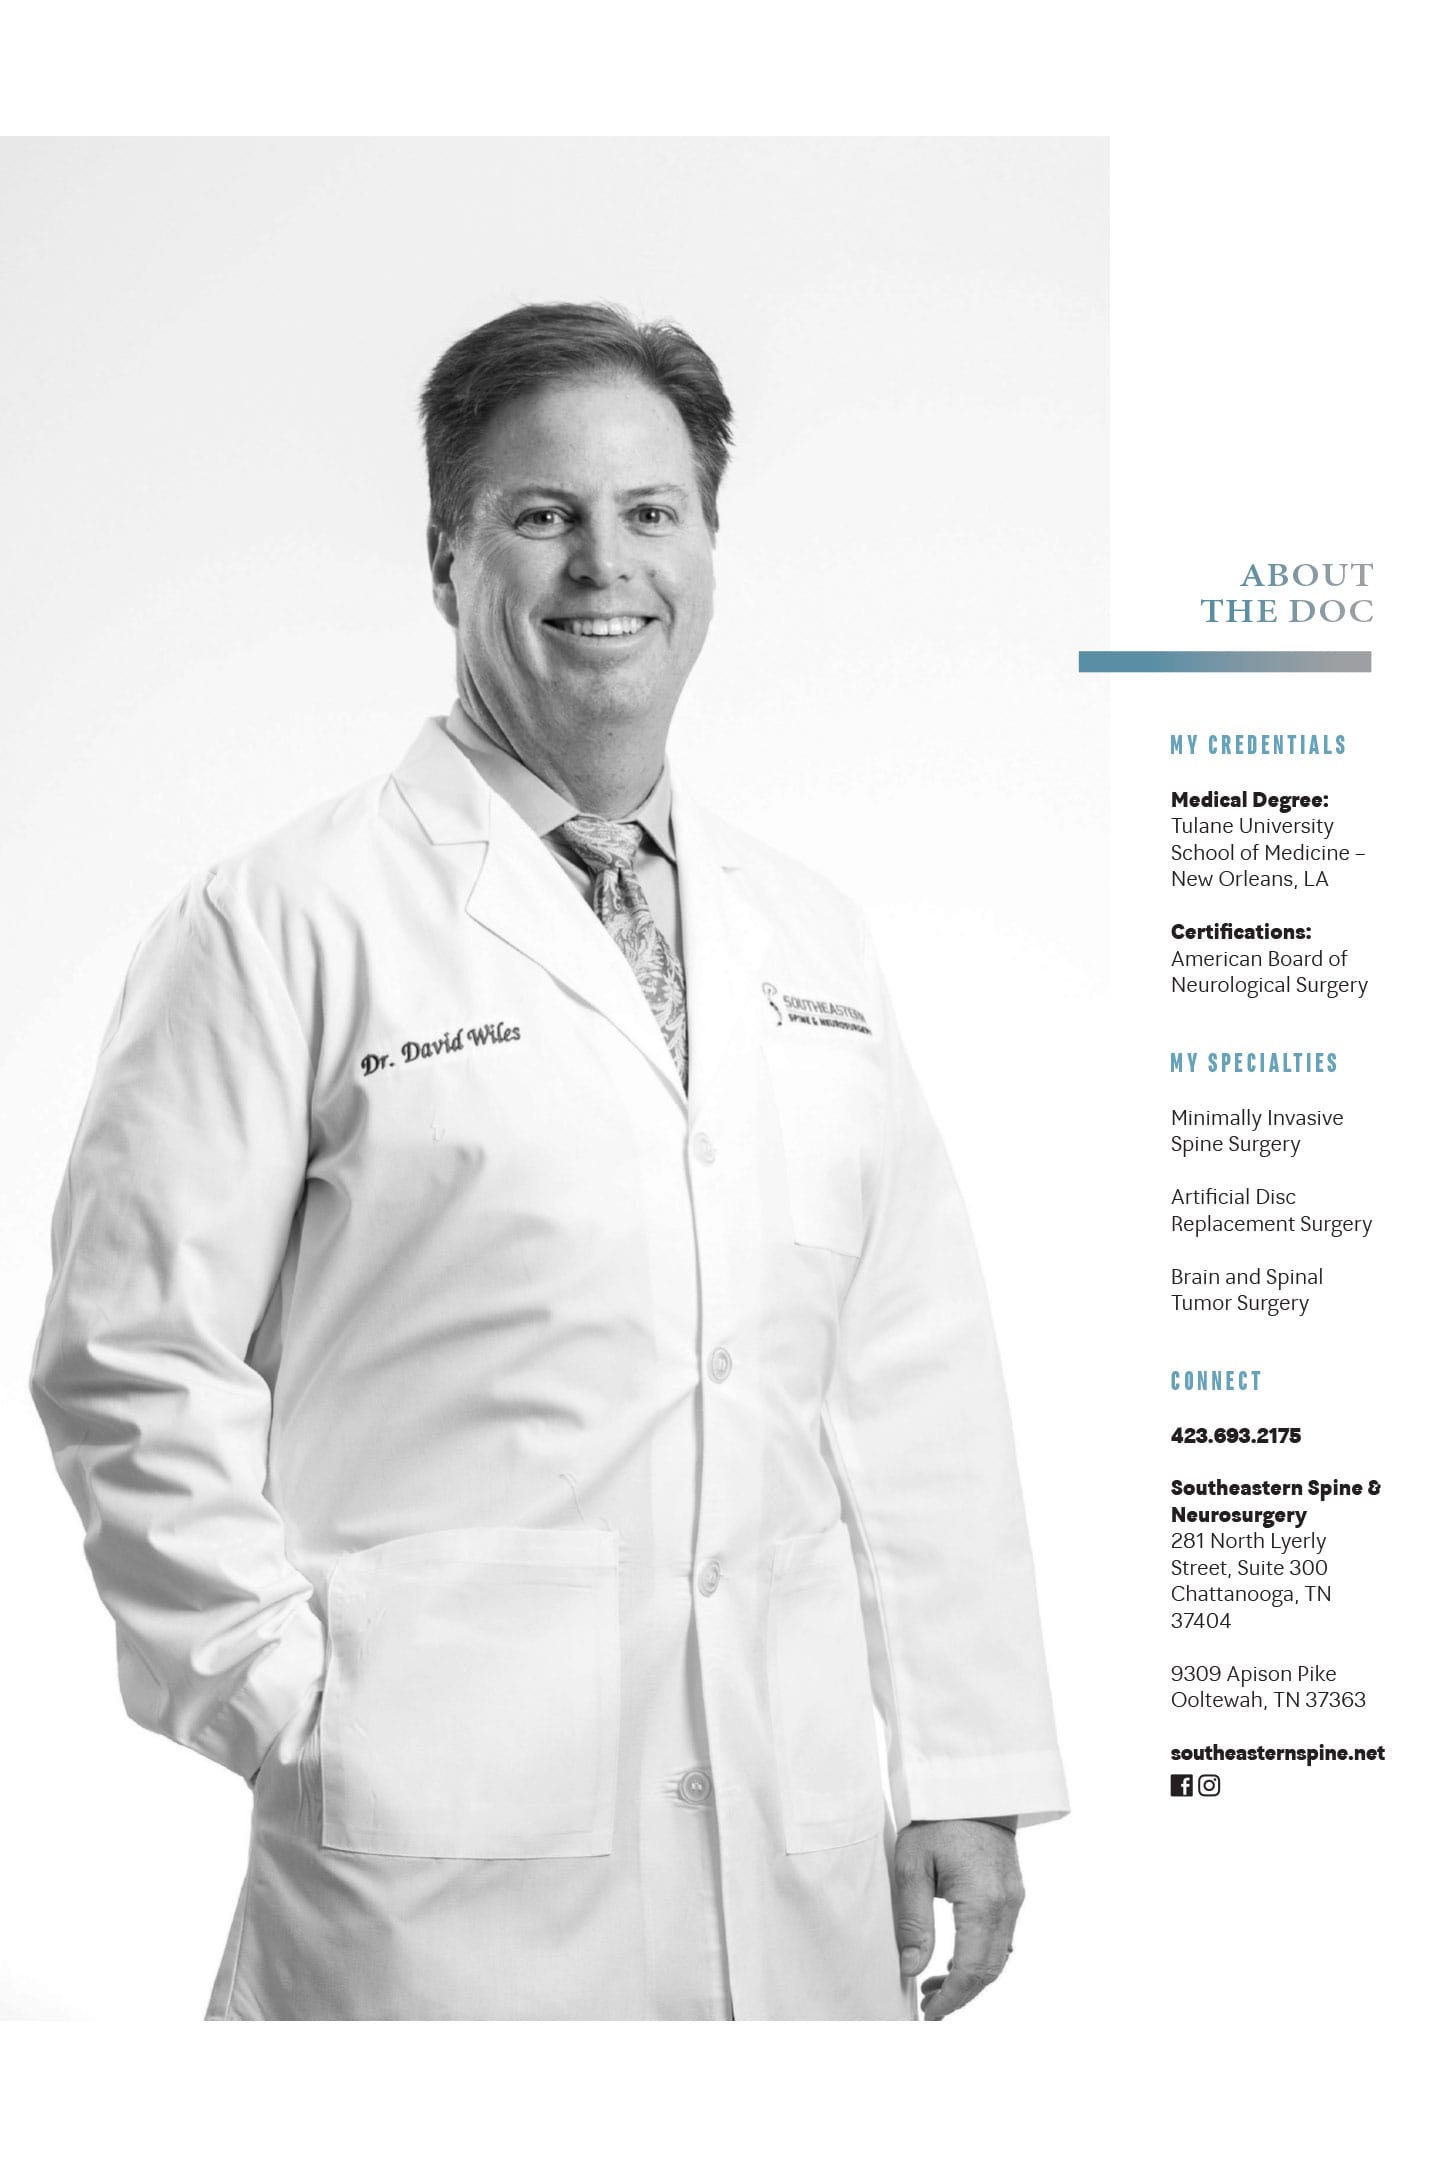 DR. DAVID A. WILES AT SOUTHEASTERN SPINE & NEUROSURGERY in Chattanooga credentials specialties and contact info